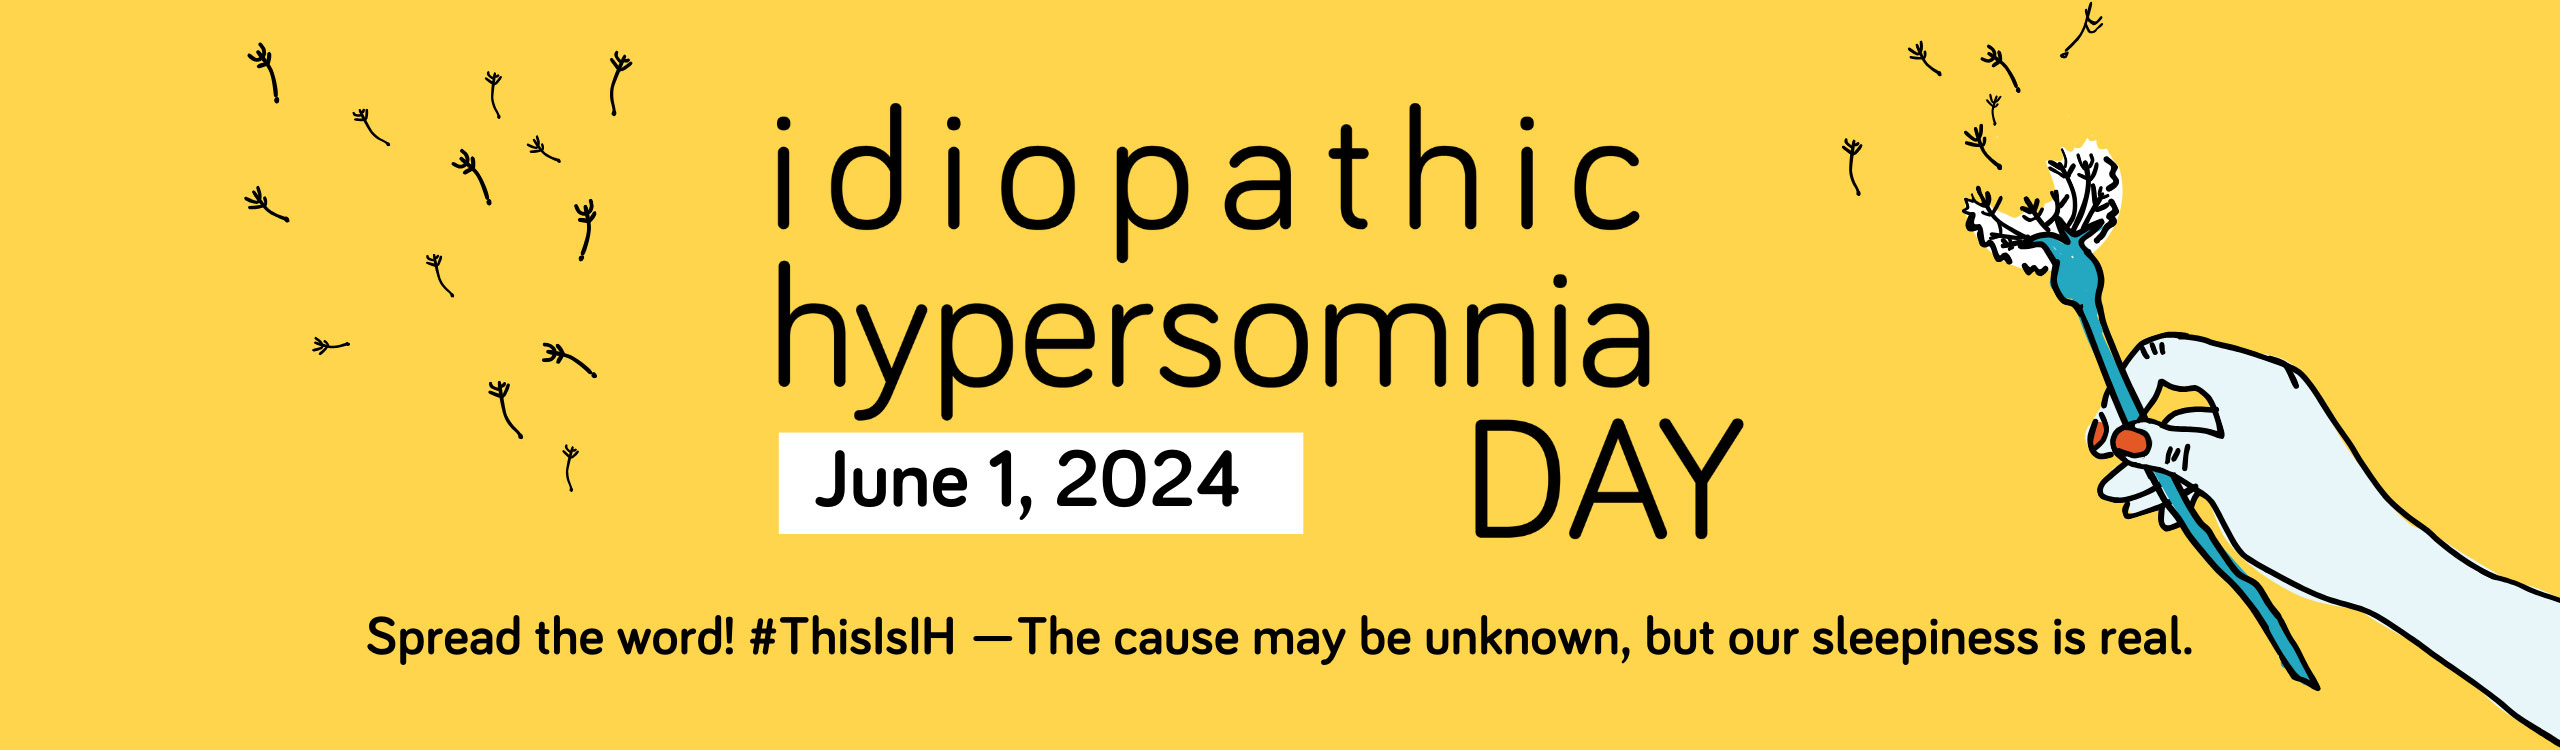 Idiopathic Hypersomnia Day - June 1, 2024 - Spread the work! #ThisIsIH - The cause may be unknown, but our sleepiness is real.